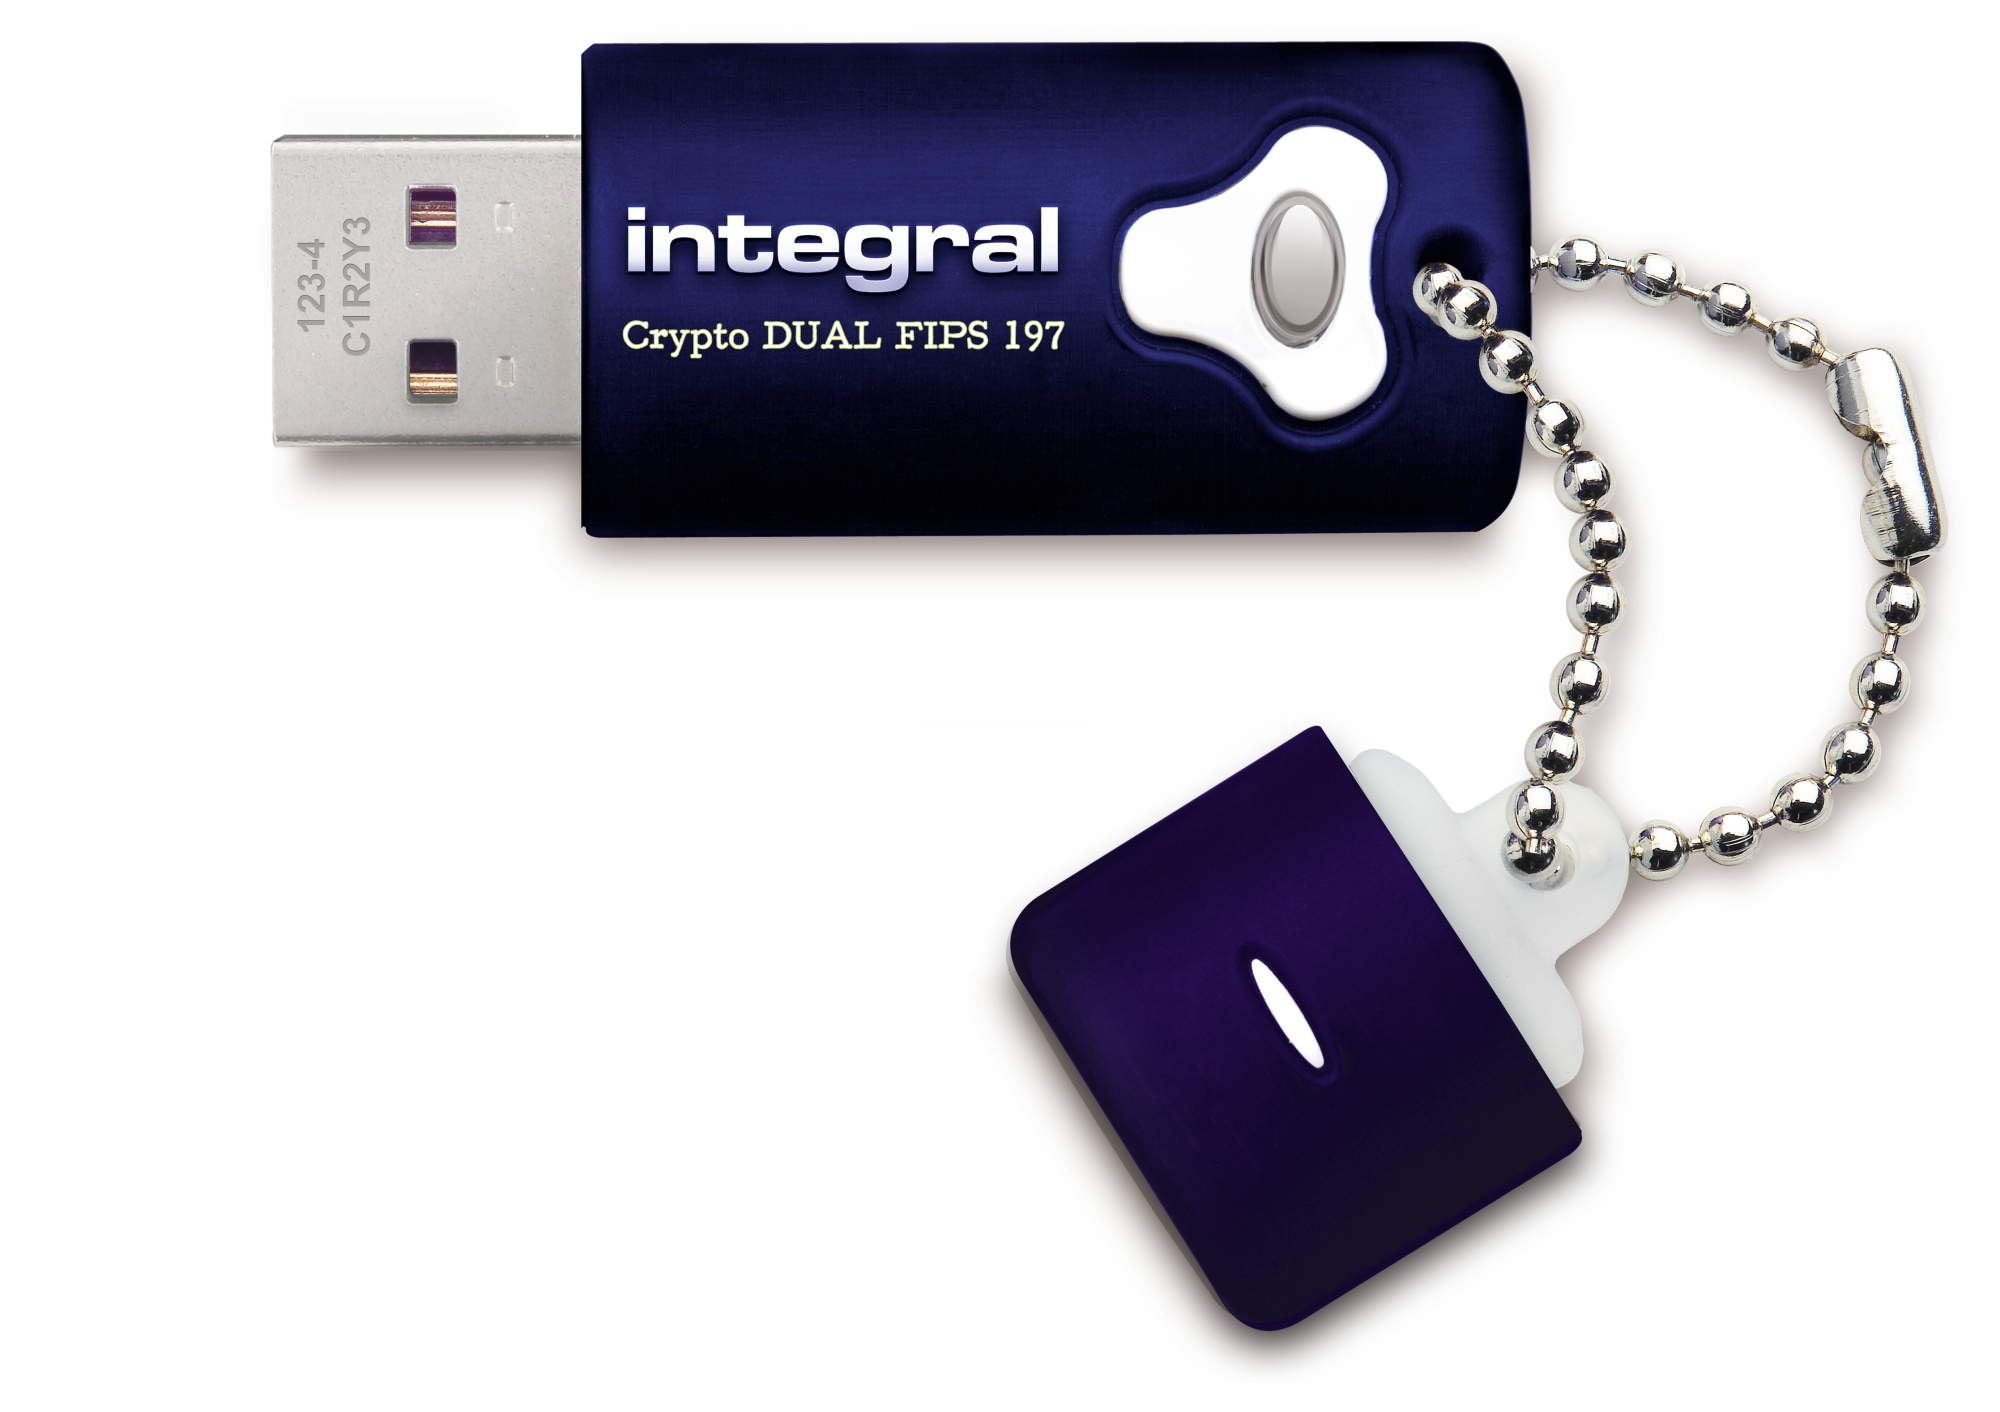 4GB Integral Crypto DUAL FIPS 197 Encrypted USB3.0 Flash Drive (AES 256-bit Hardware Encryption) - image 4 of 4